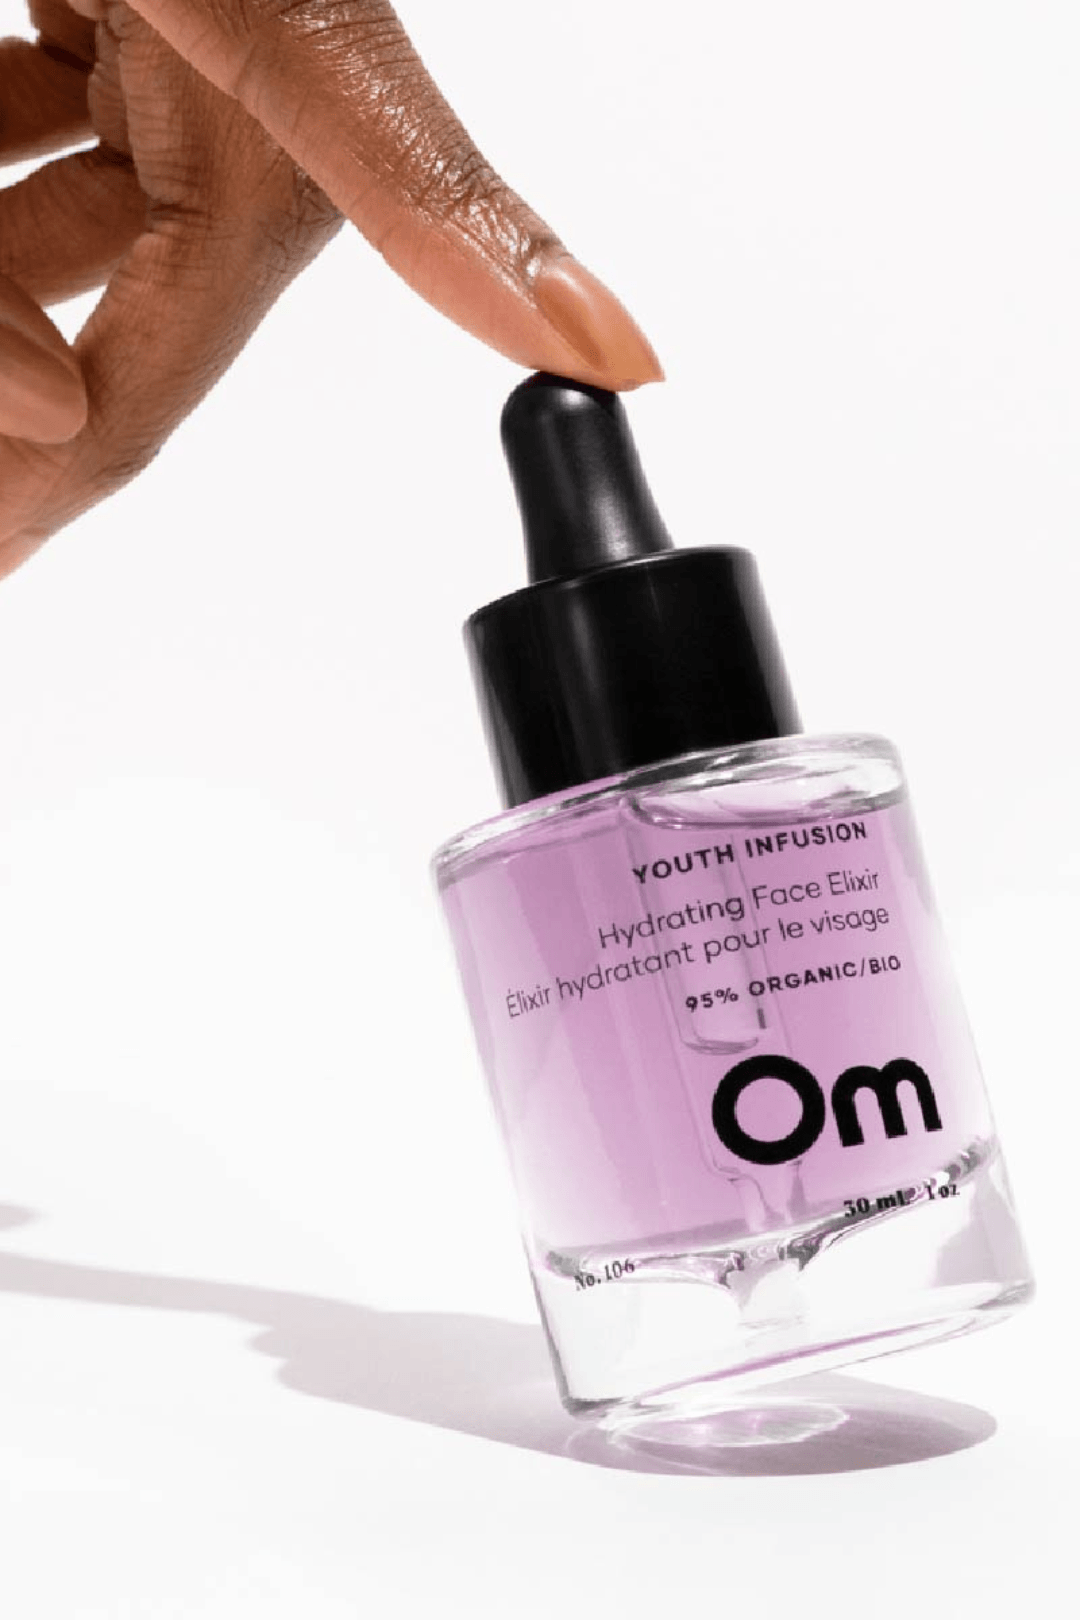 Youth Infusion Hydrating Face Elixir - Ardent Market - Om Organics